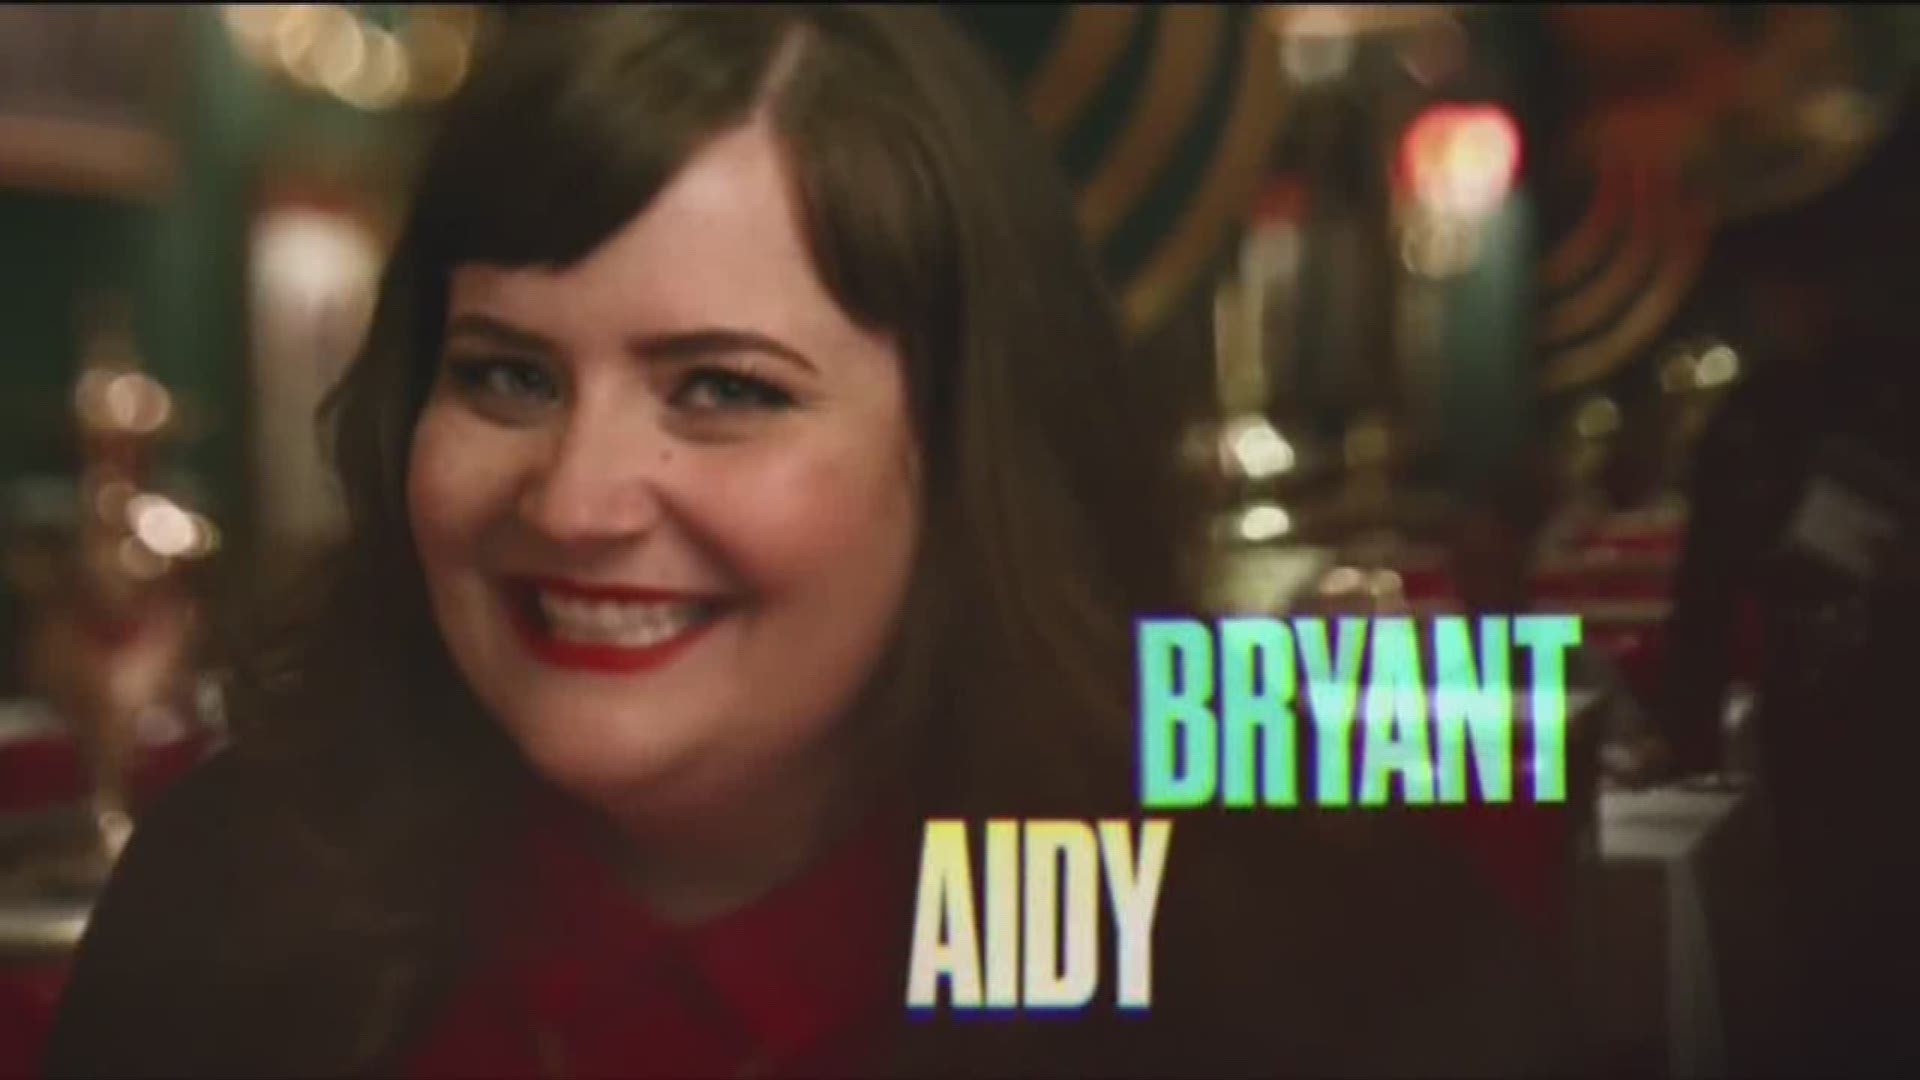 Get a behind the scenes look at SNL with the Valley's own, Aidy Bryant.